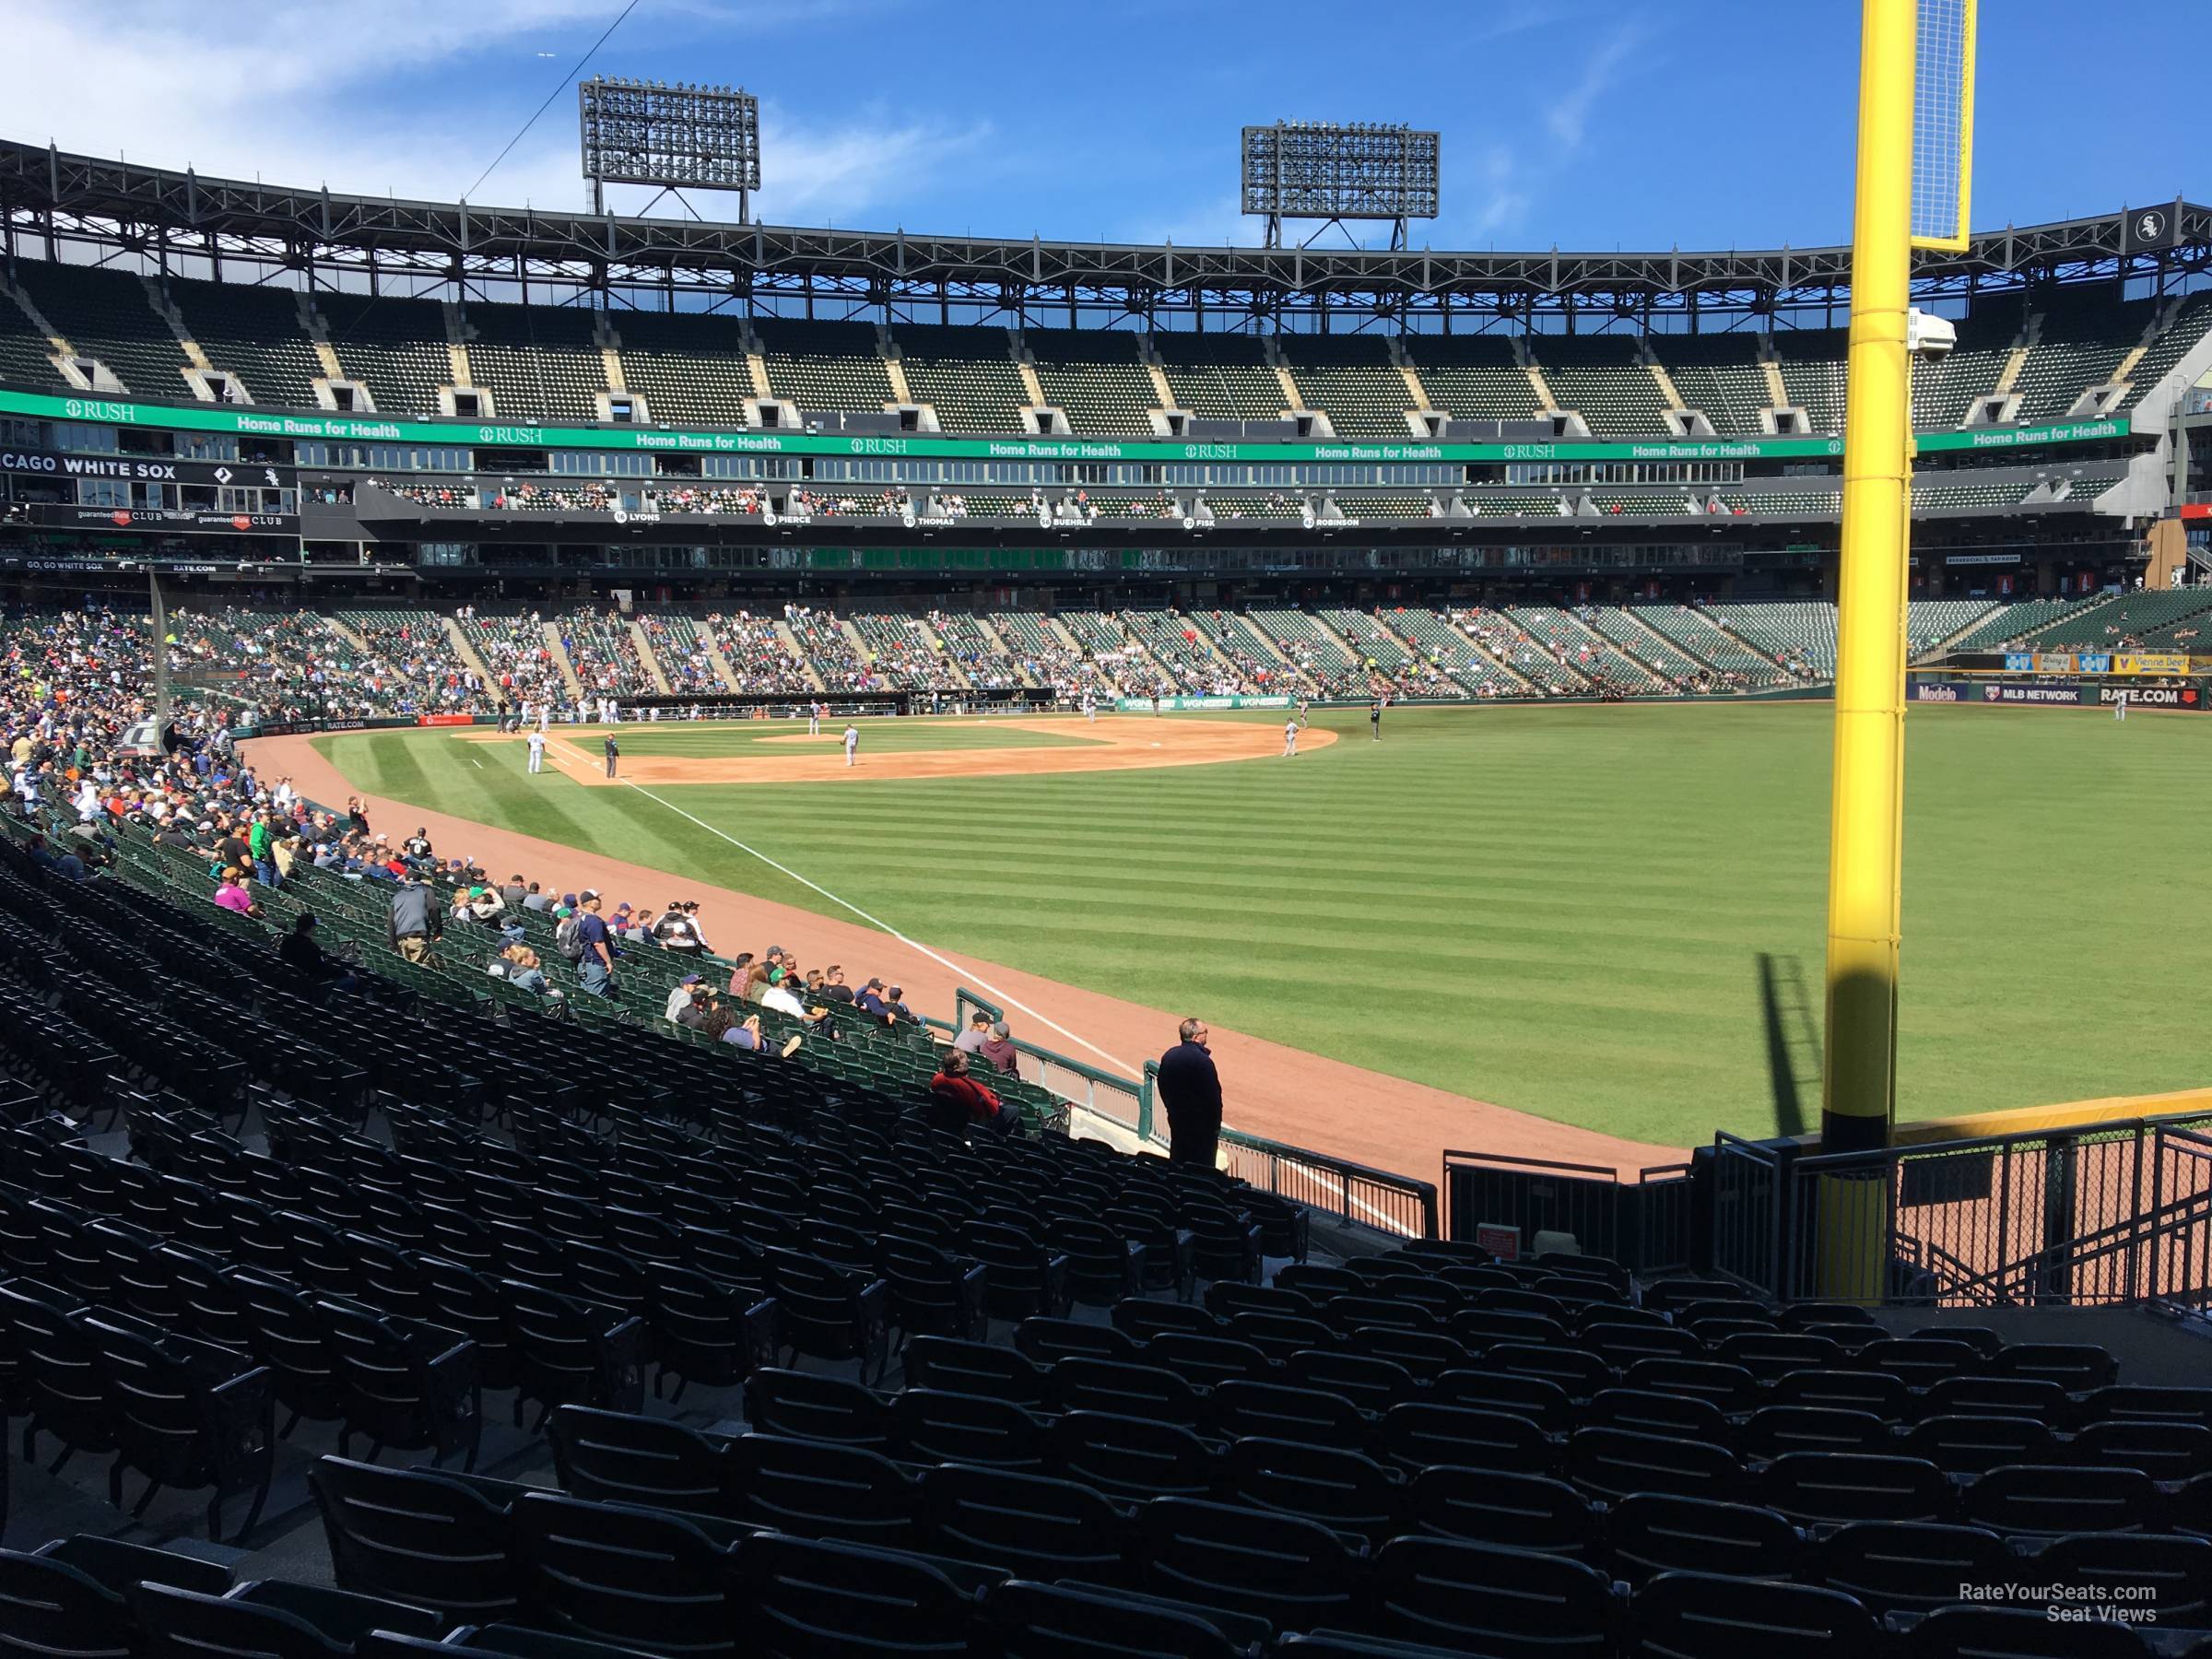 section 109, row 25 seat view  - guaranteed rate field